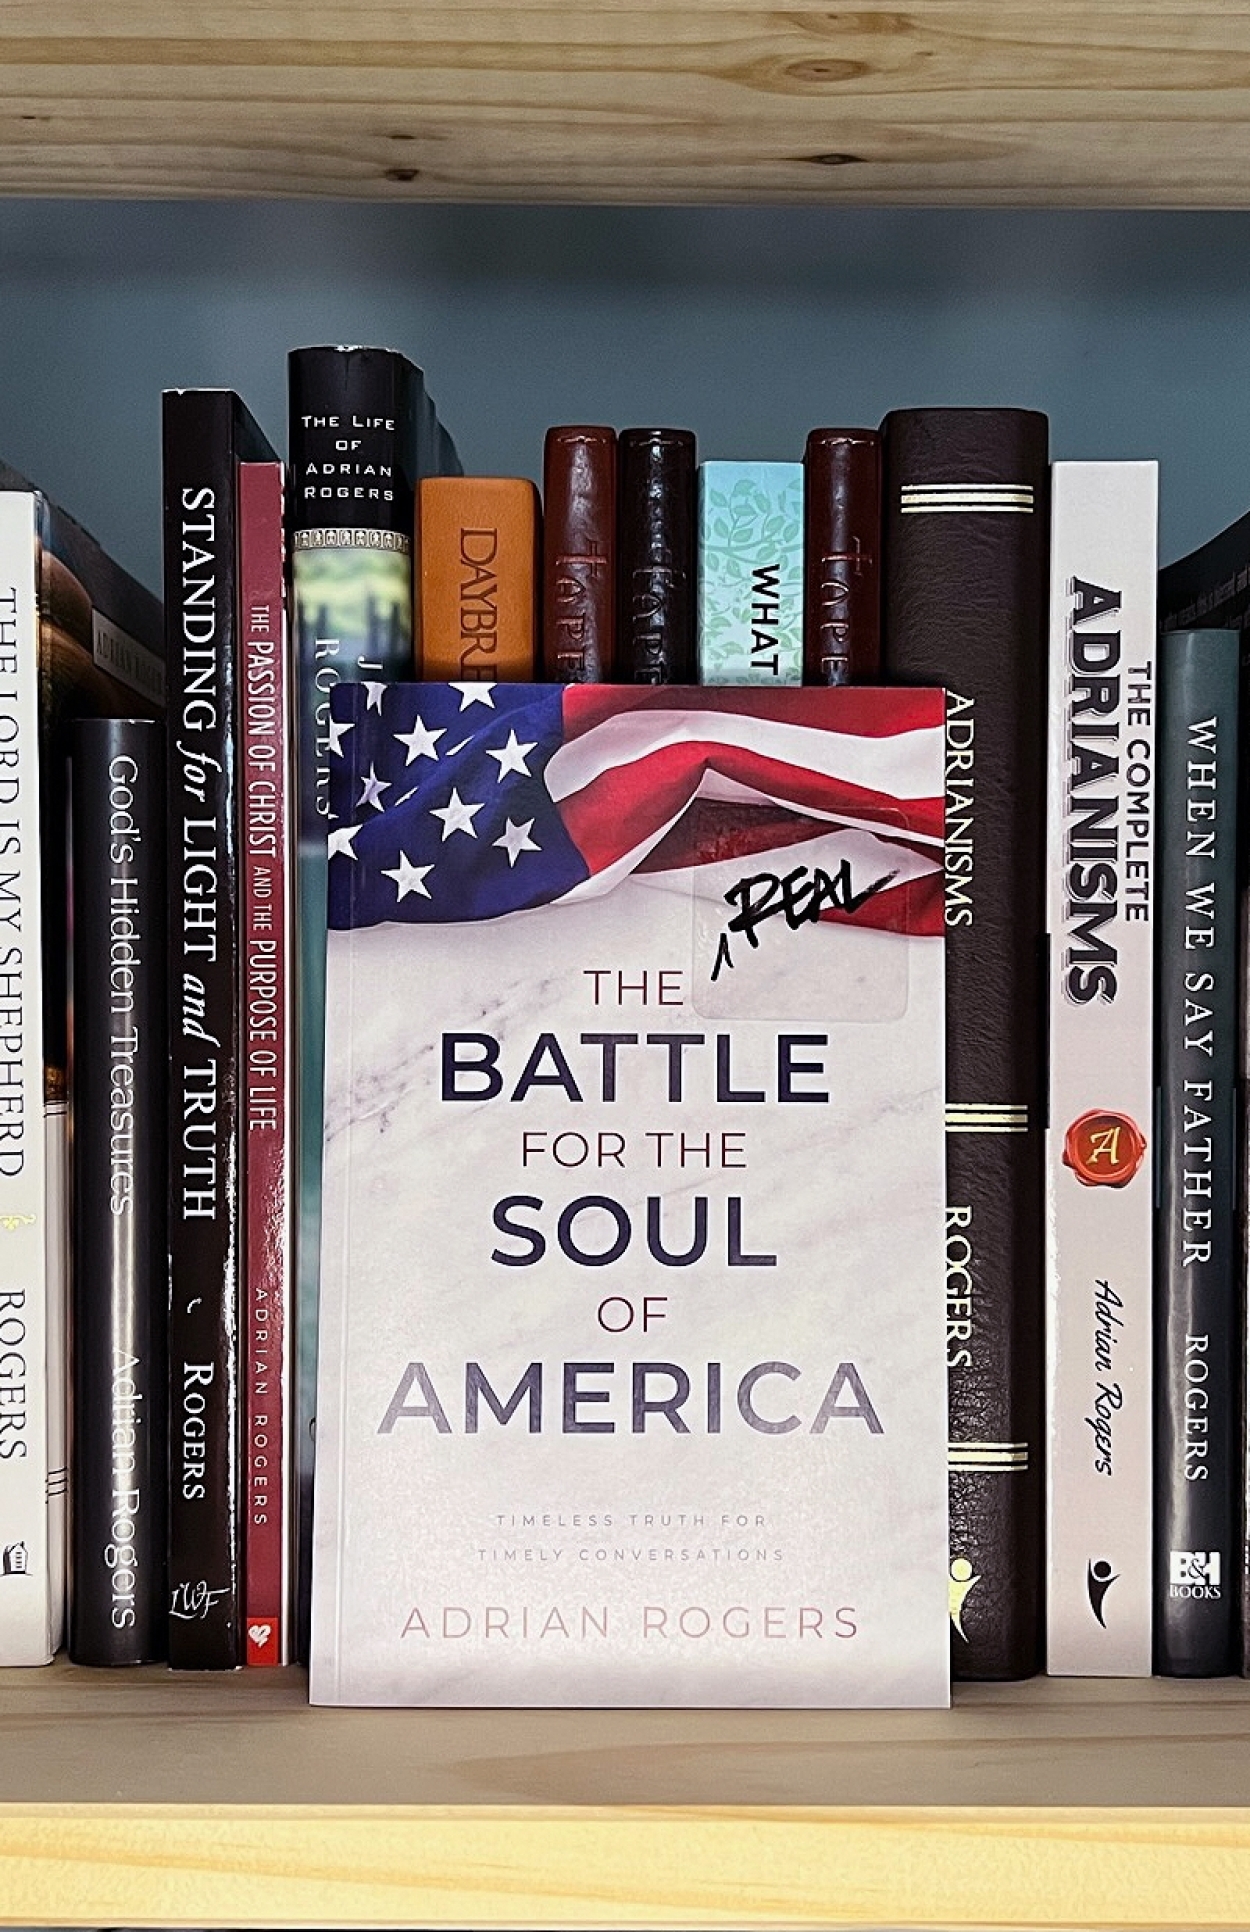 B130 the real battle for the soul of america book BOOKSHELF